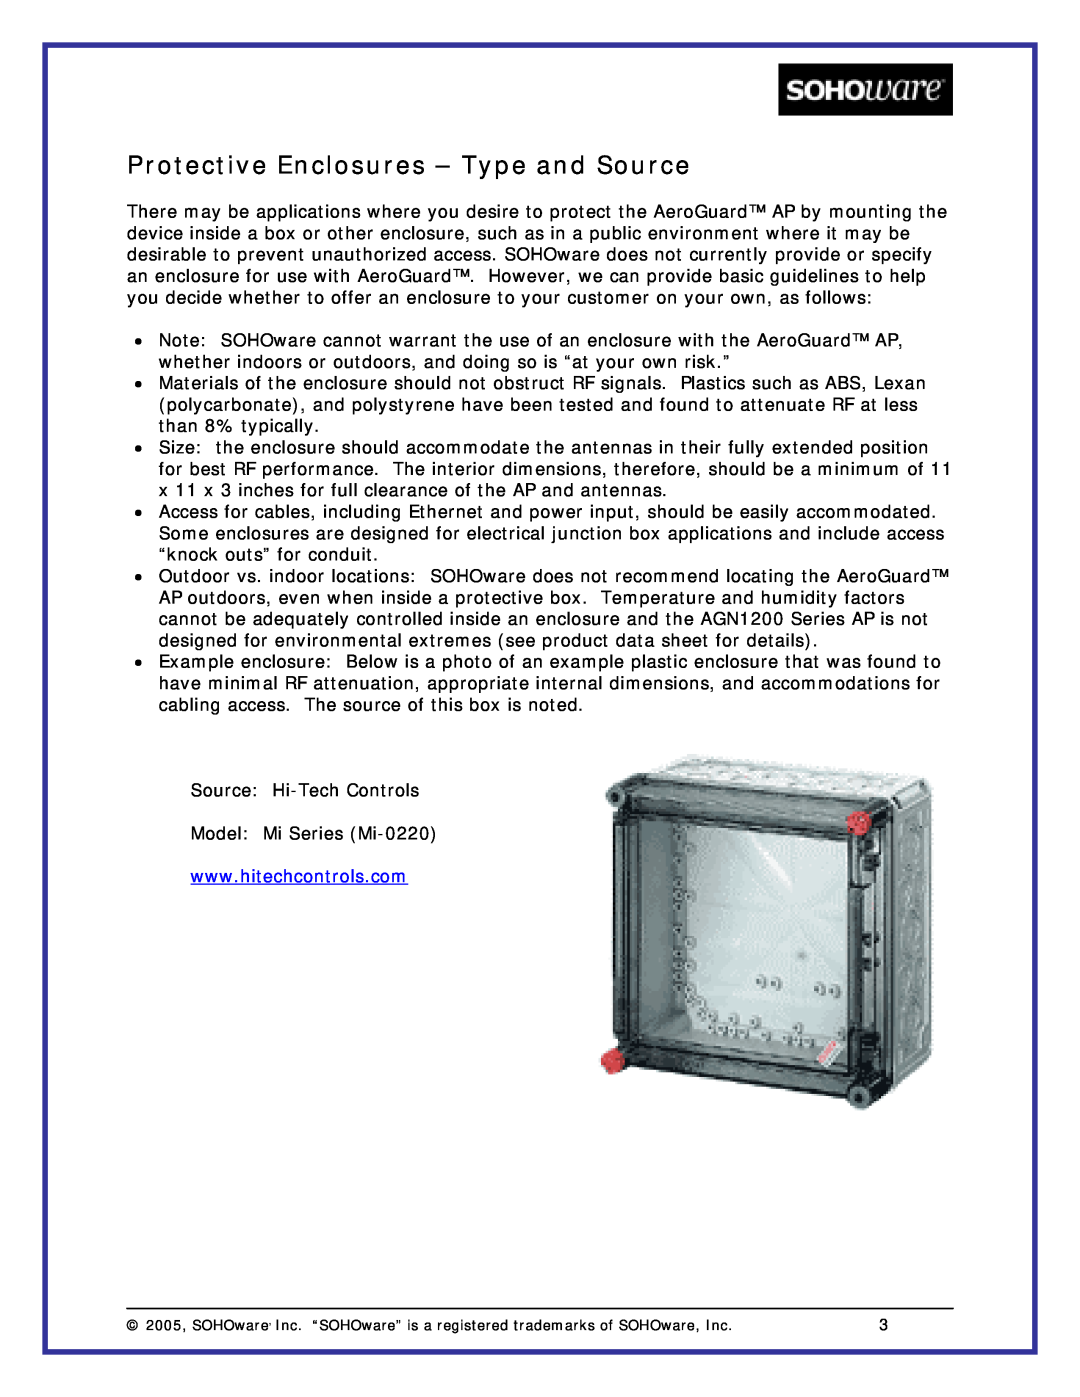 Soho AP manual Protective Enclosures - Type and Source 